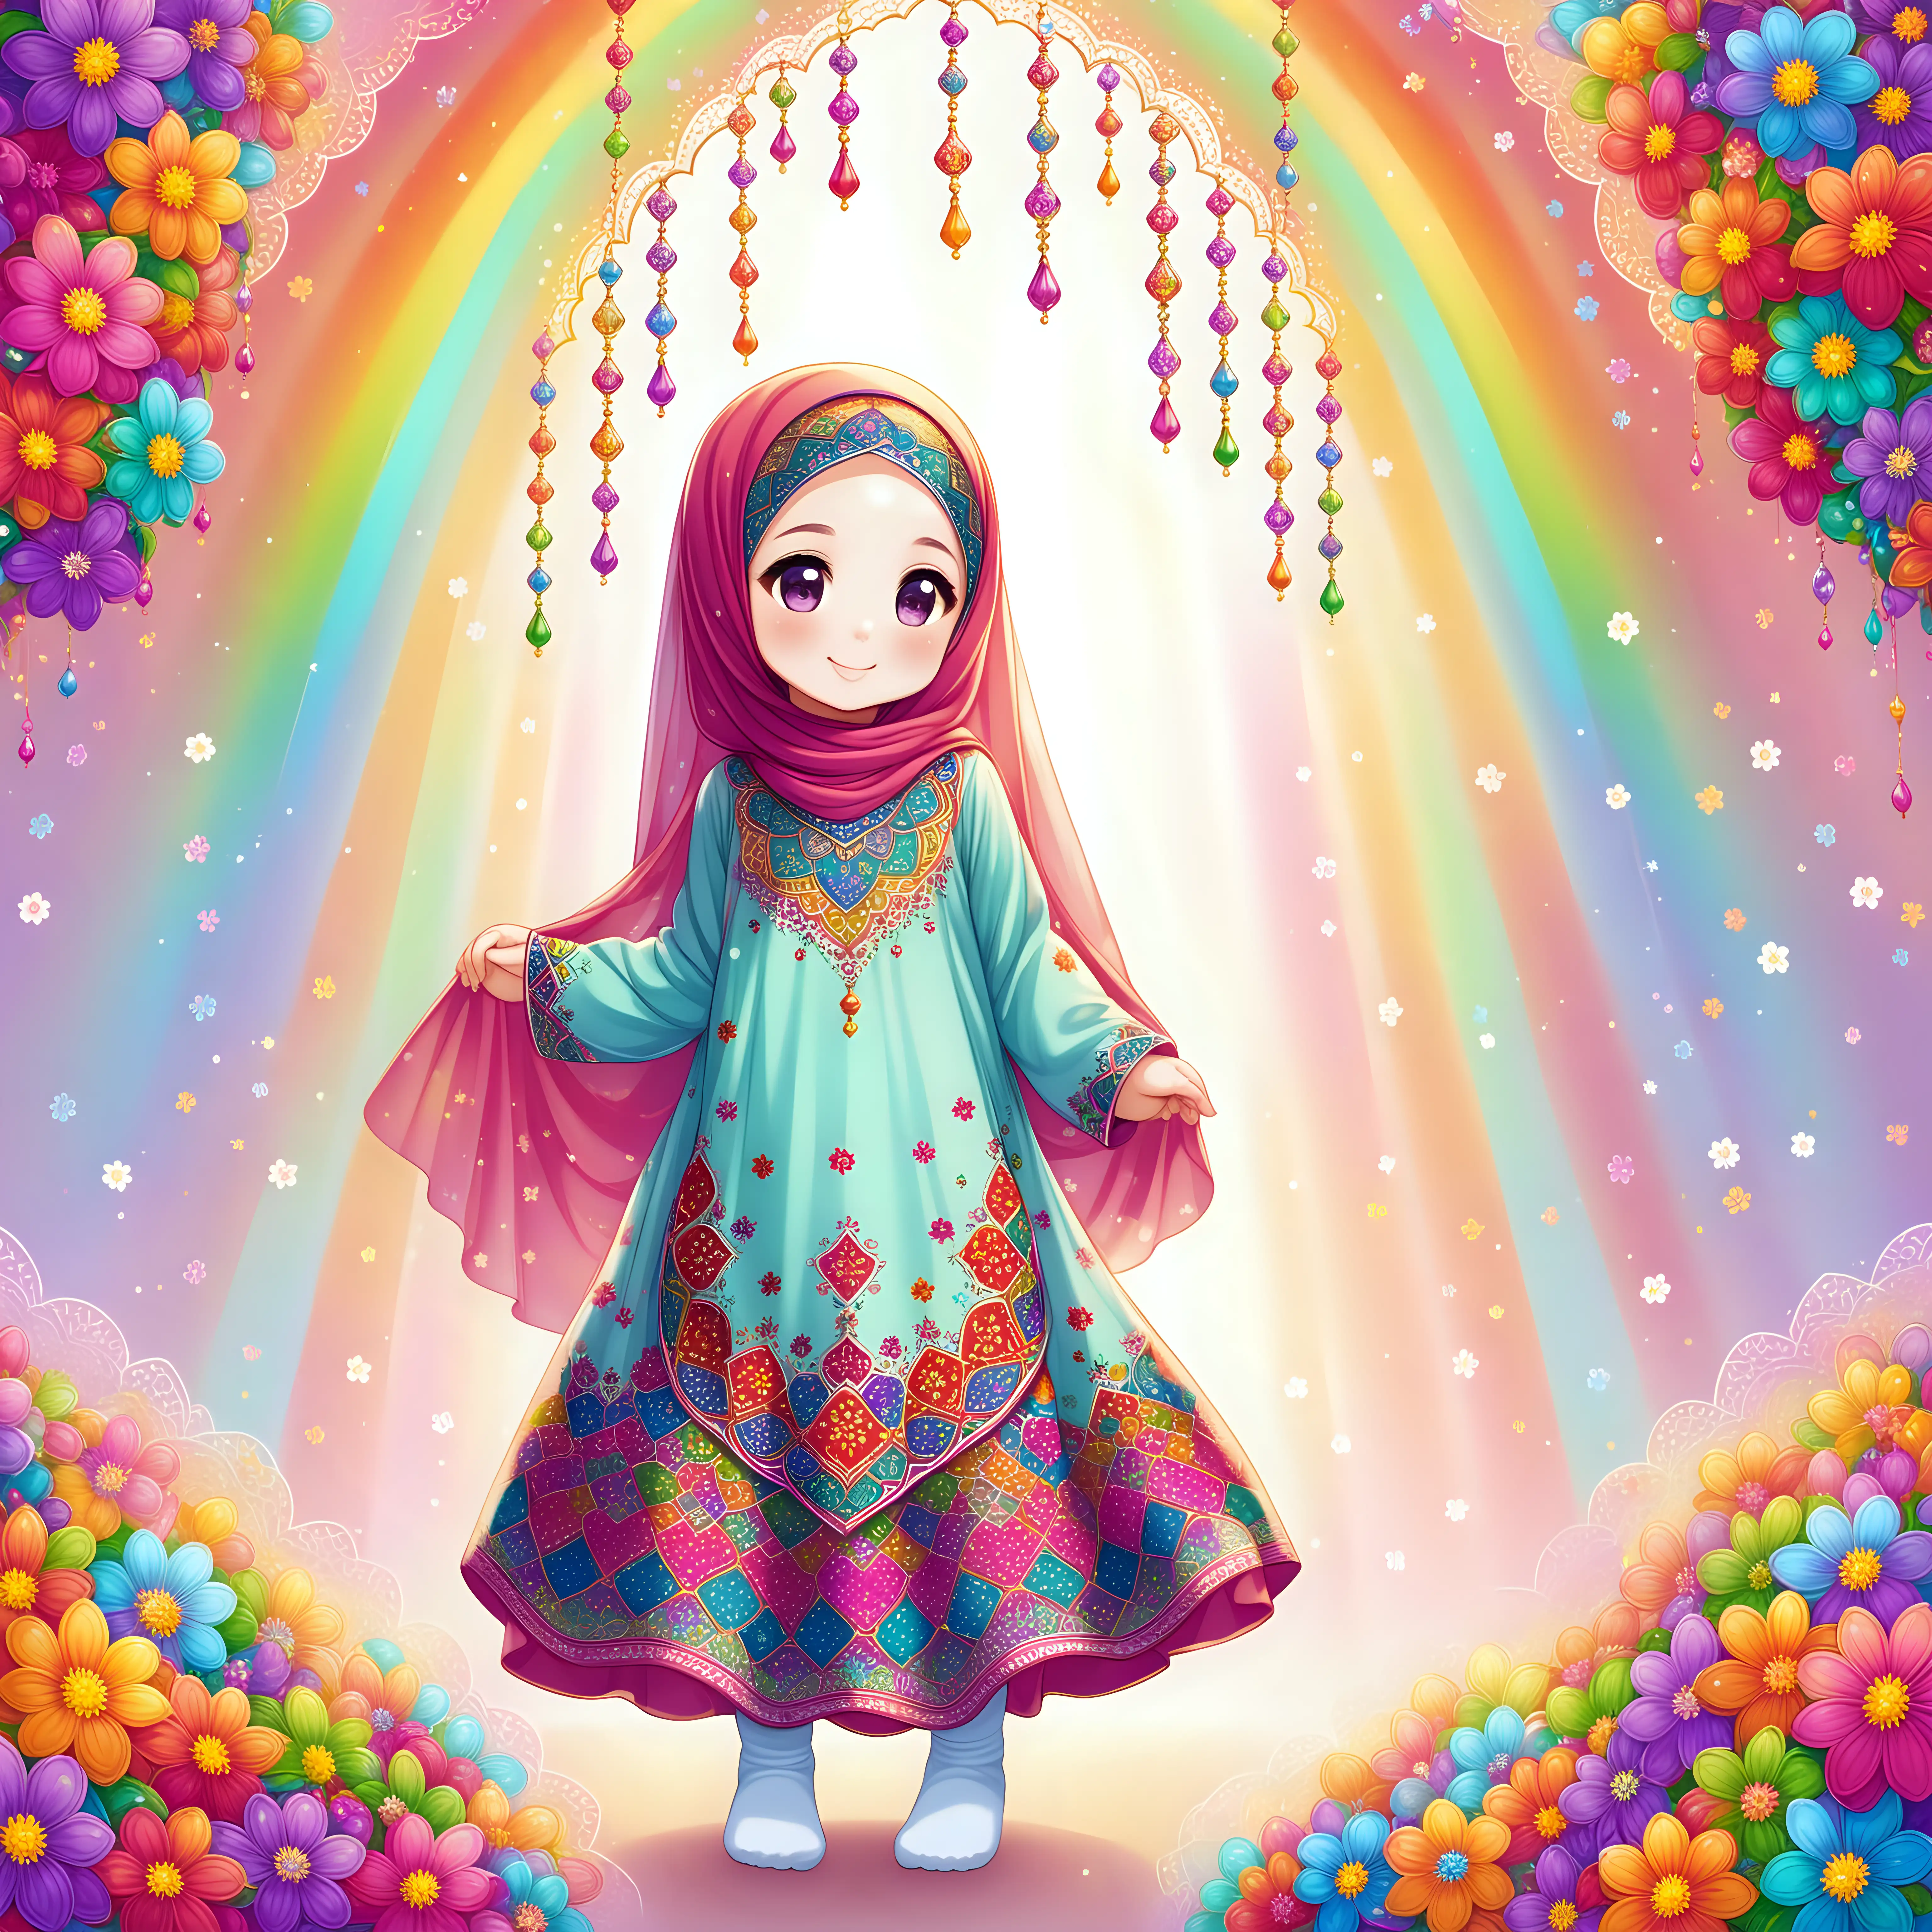 Persian little girl(full height, Muslim, with emphasis no hair out of veil(Hijab), white skin, cute, smiling, wearing socks, clothes full of Persian designs).
Atmosphere full of many rainbow flowers.